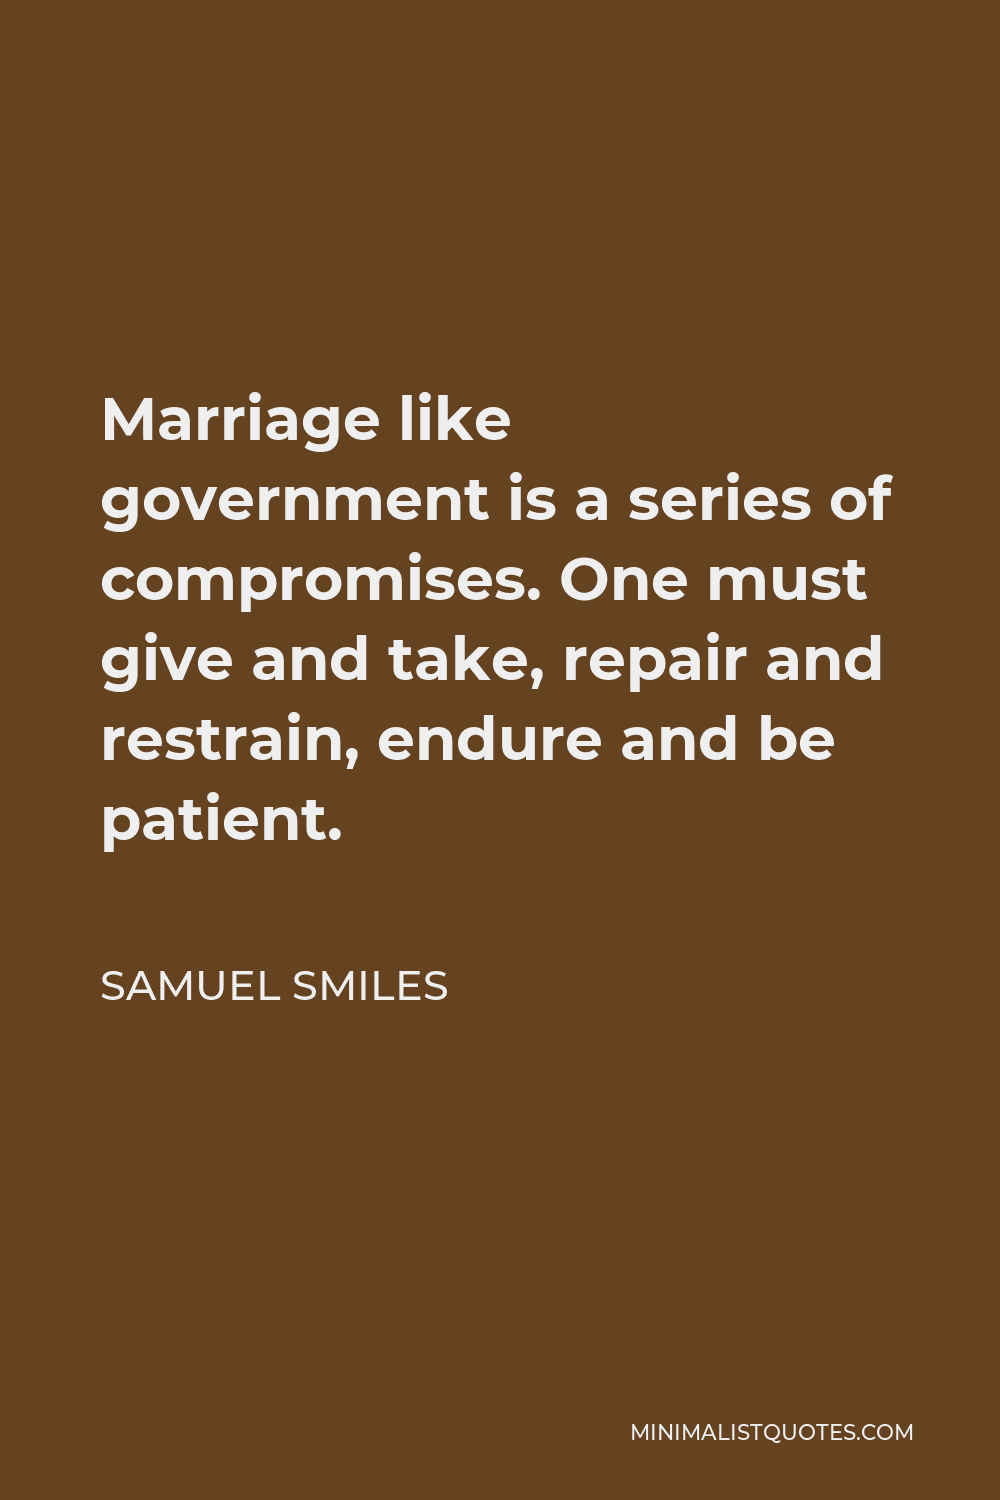 Samuel Smiles Quote - Marriage like government is a series of compromises. One must give and take, repair and restrain, endure and be patient.